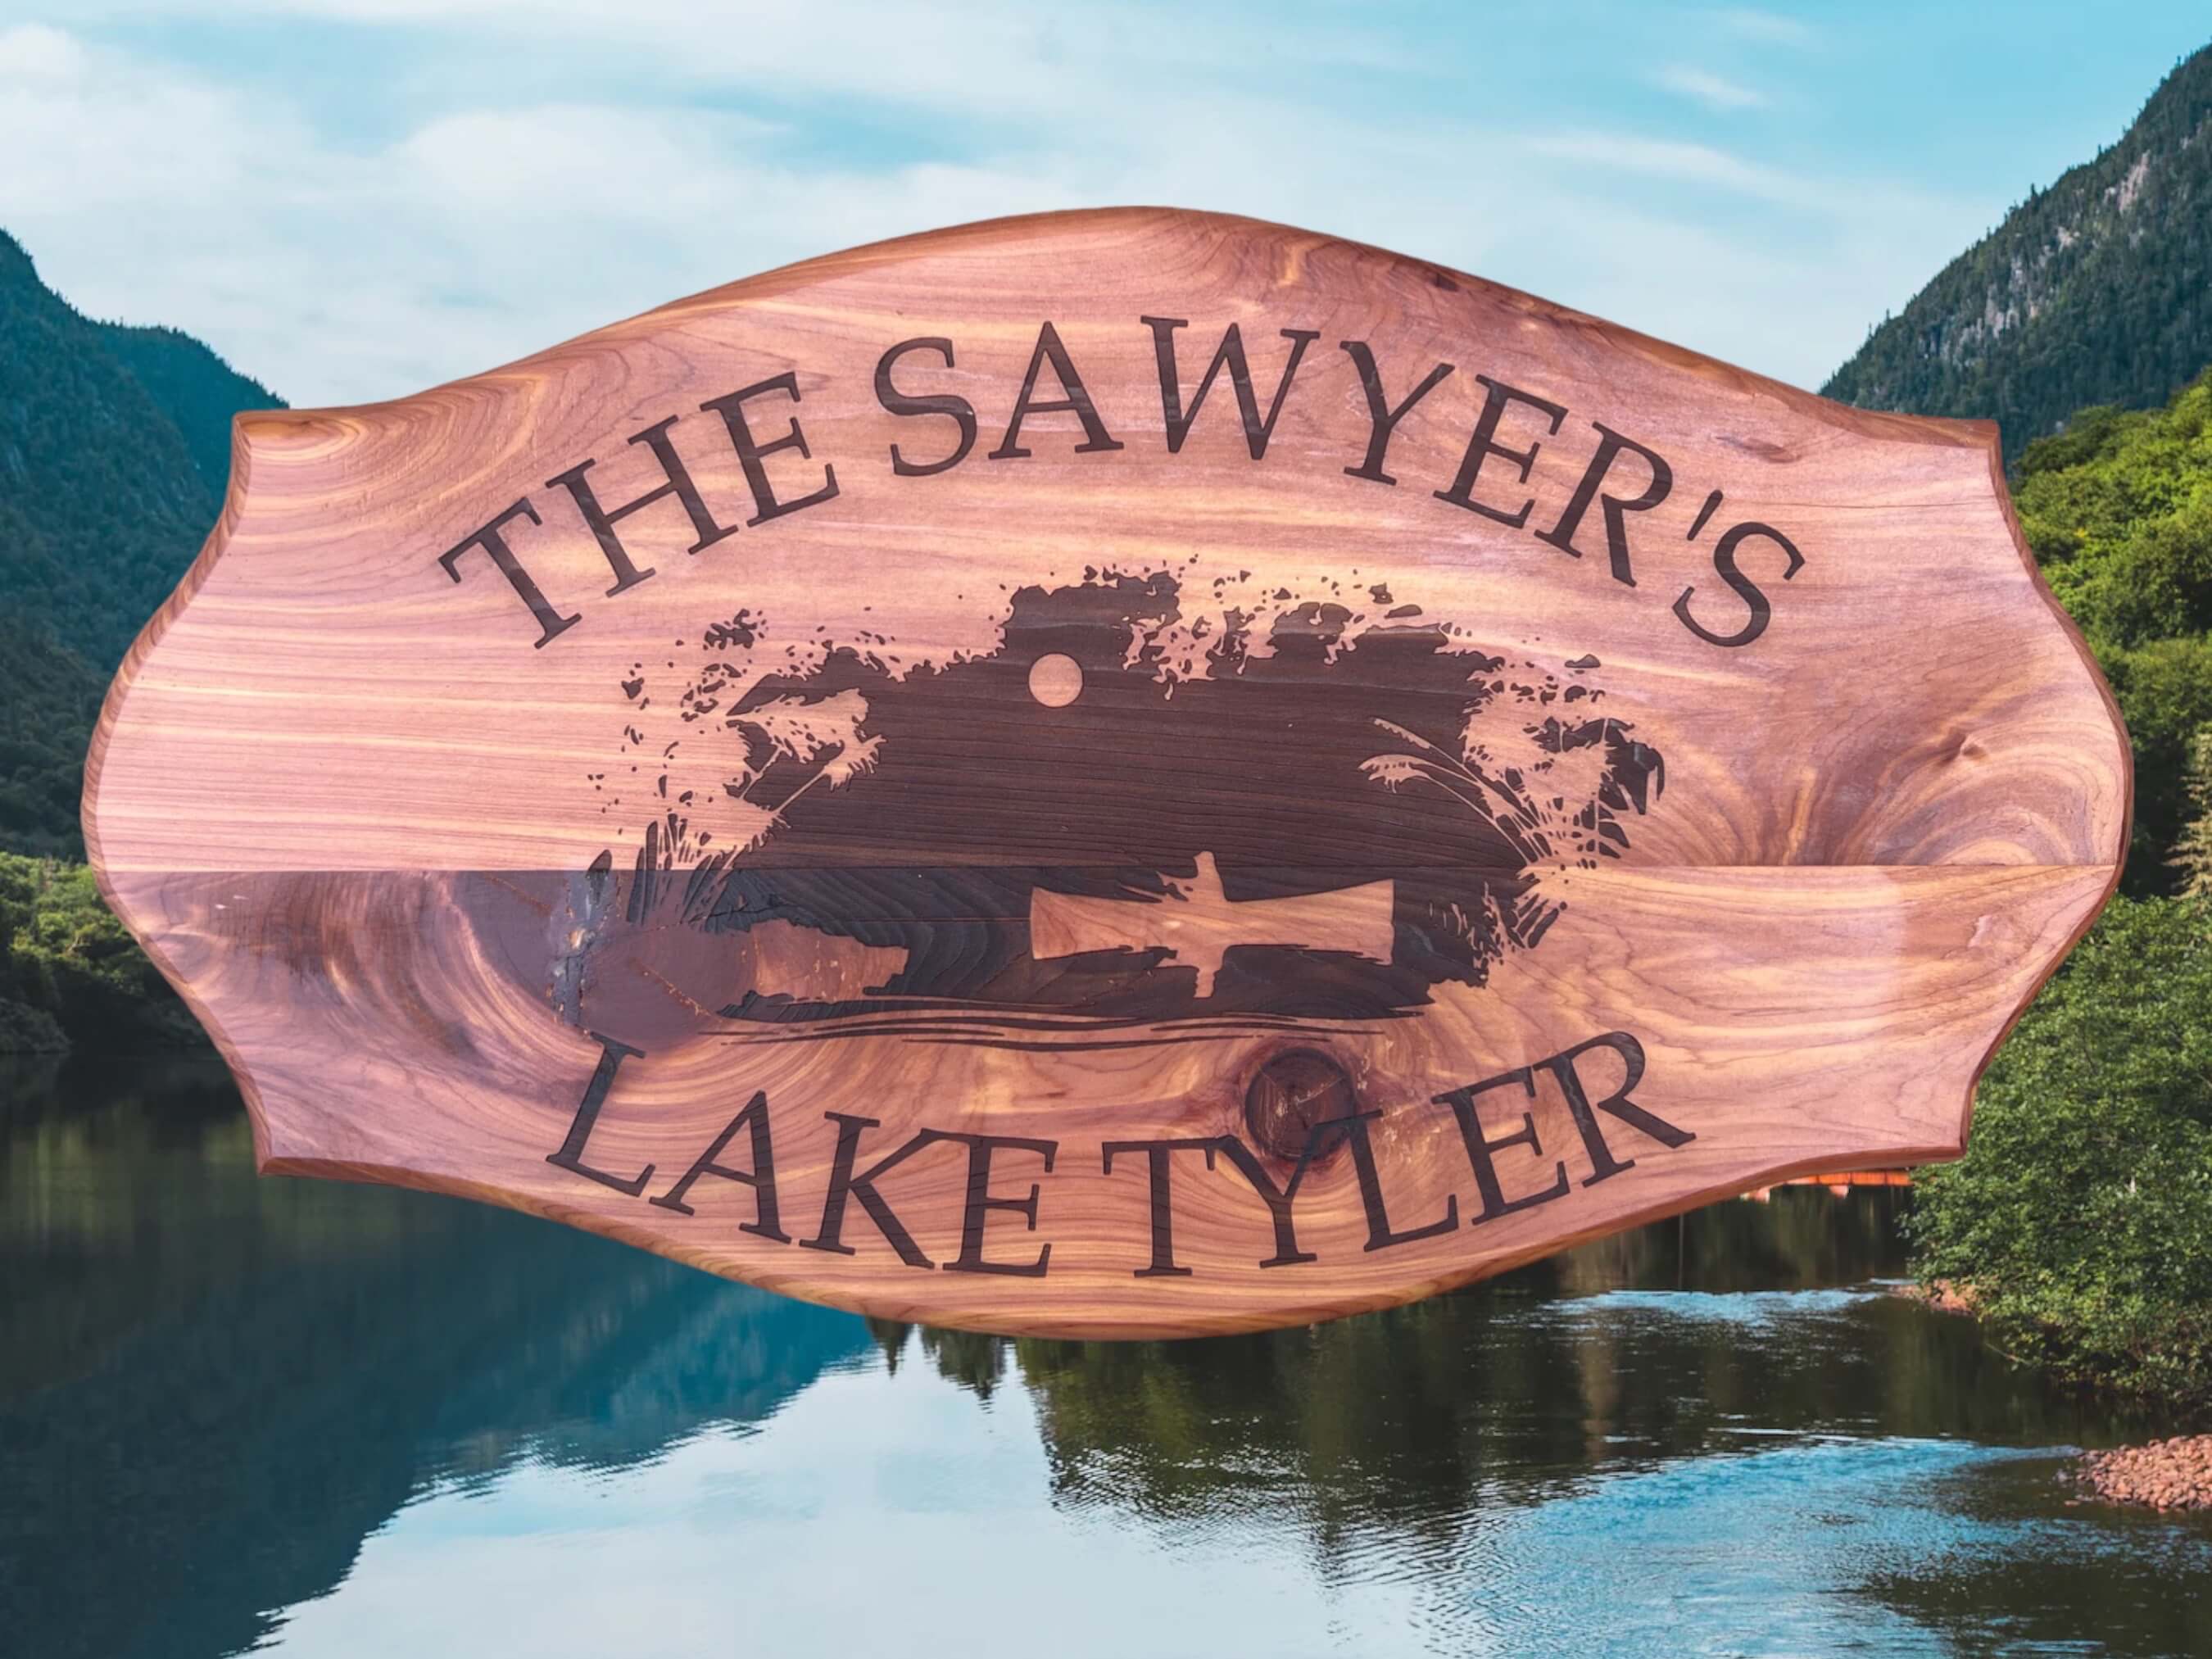 "Personalized Red Cedar Lake House Sign" Description: Close-up of a beautifully crafted red cedar lake house sign. The sign showcases laser-engraved details and is customizable with the customer's last name and lake name.